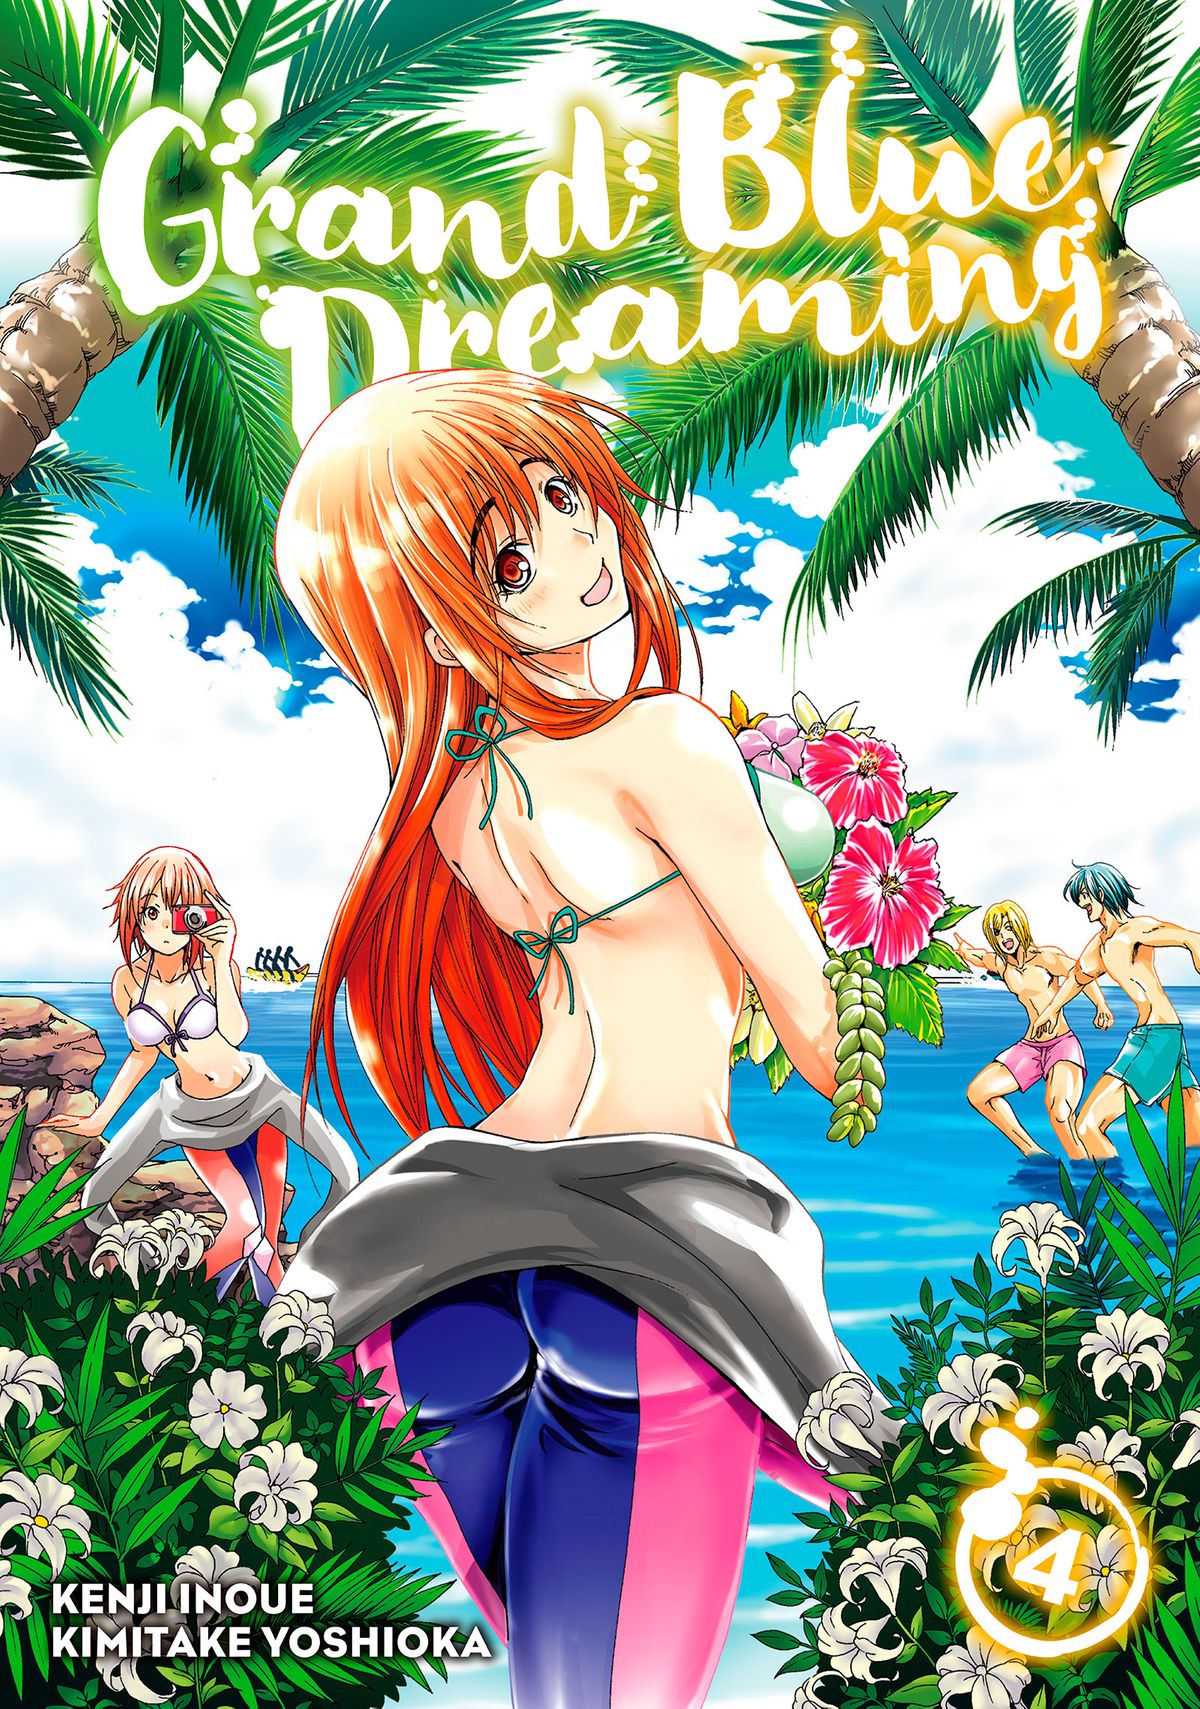 Grand Blue Dreaming Set - Anime adapted set (1-5)